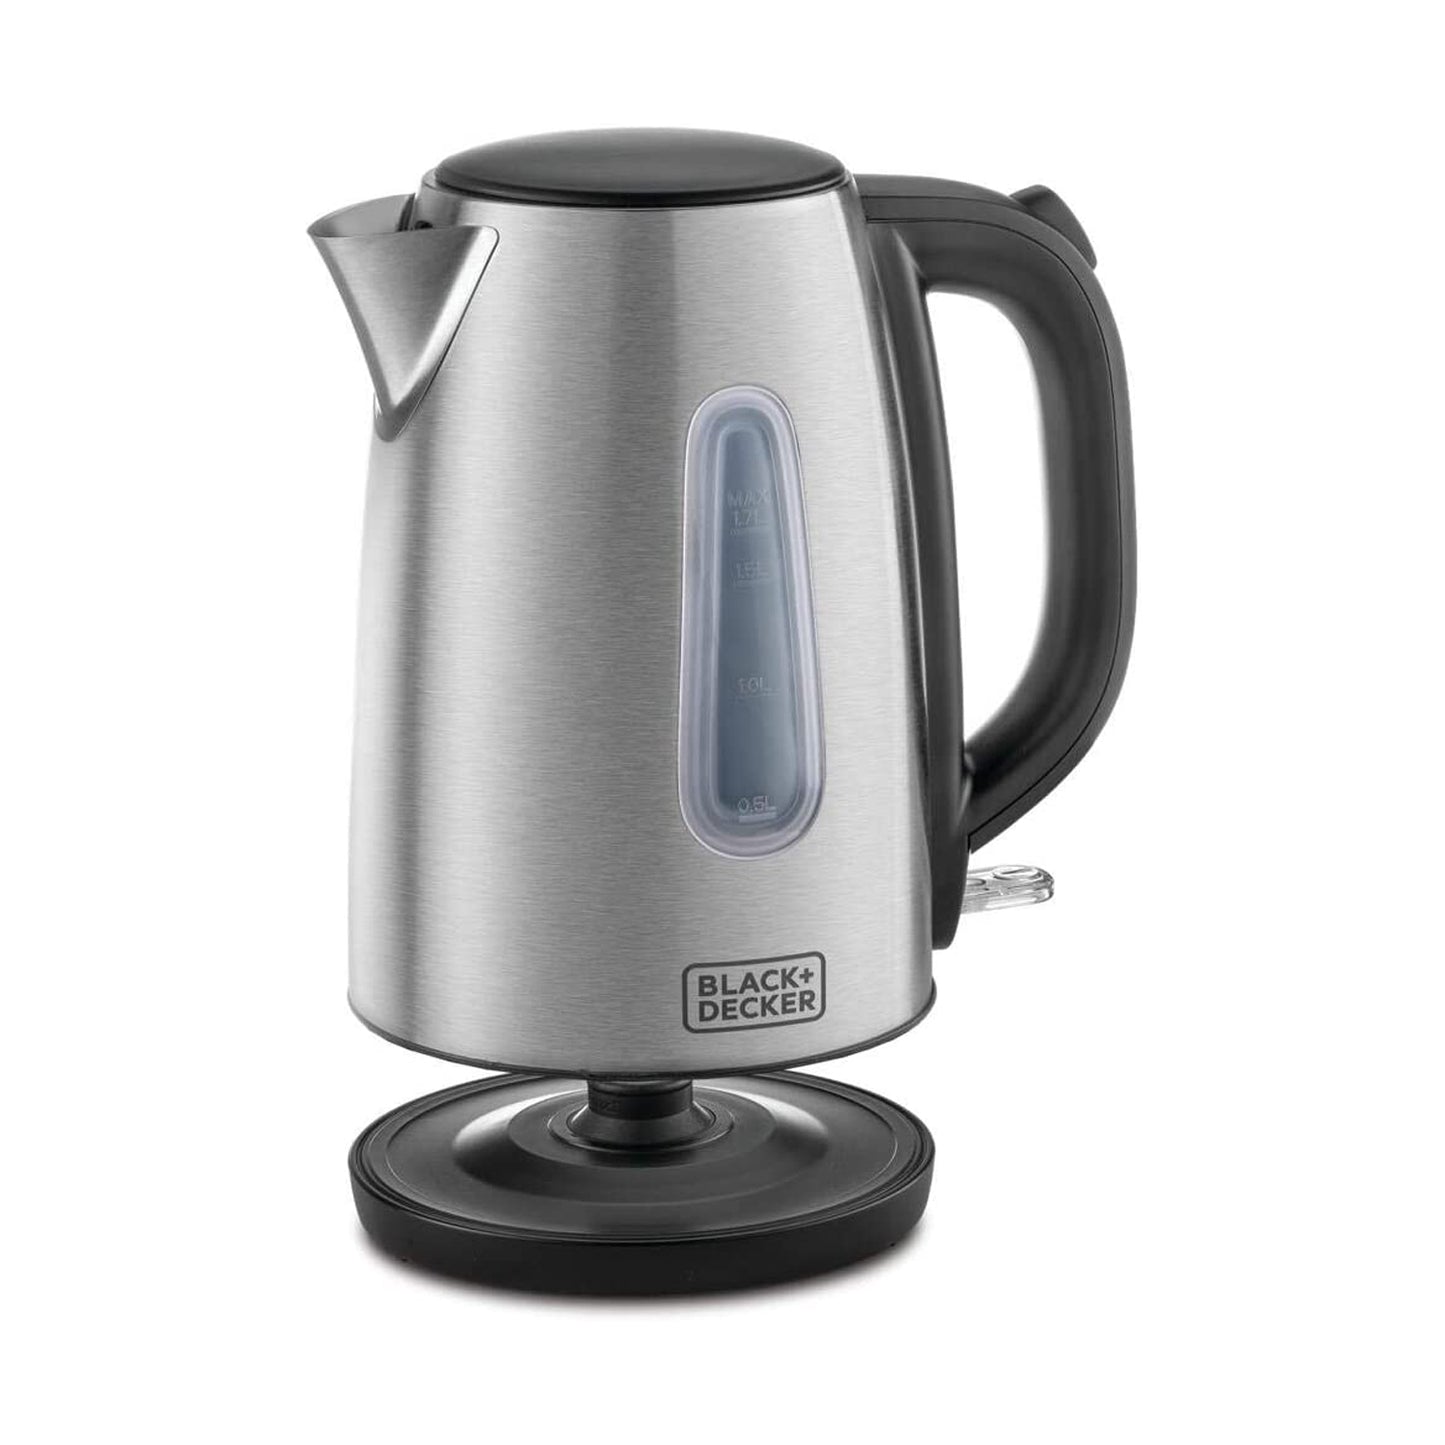 BLACK+DECKER 2200W 1.7L Cordless Electric Kettle With Water-Level Indicator, Removable Filter, Auto Shut-Off And Stainless Steel Body, Perfect for Warm Beverages JC450 2 Years Warranty